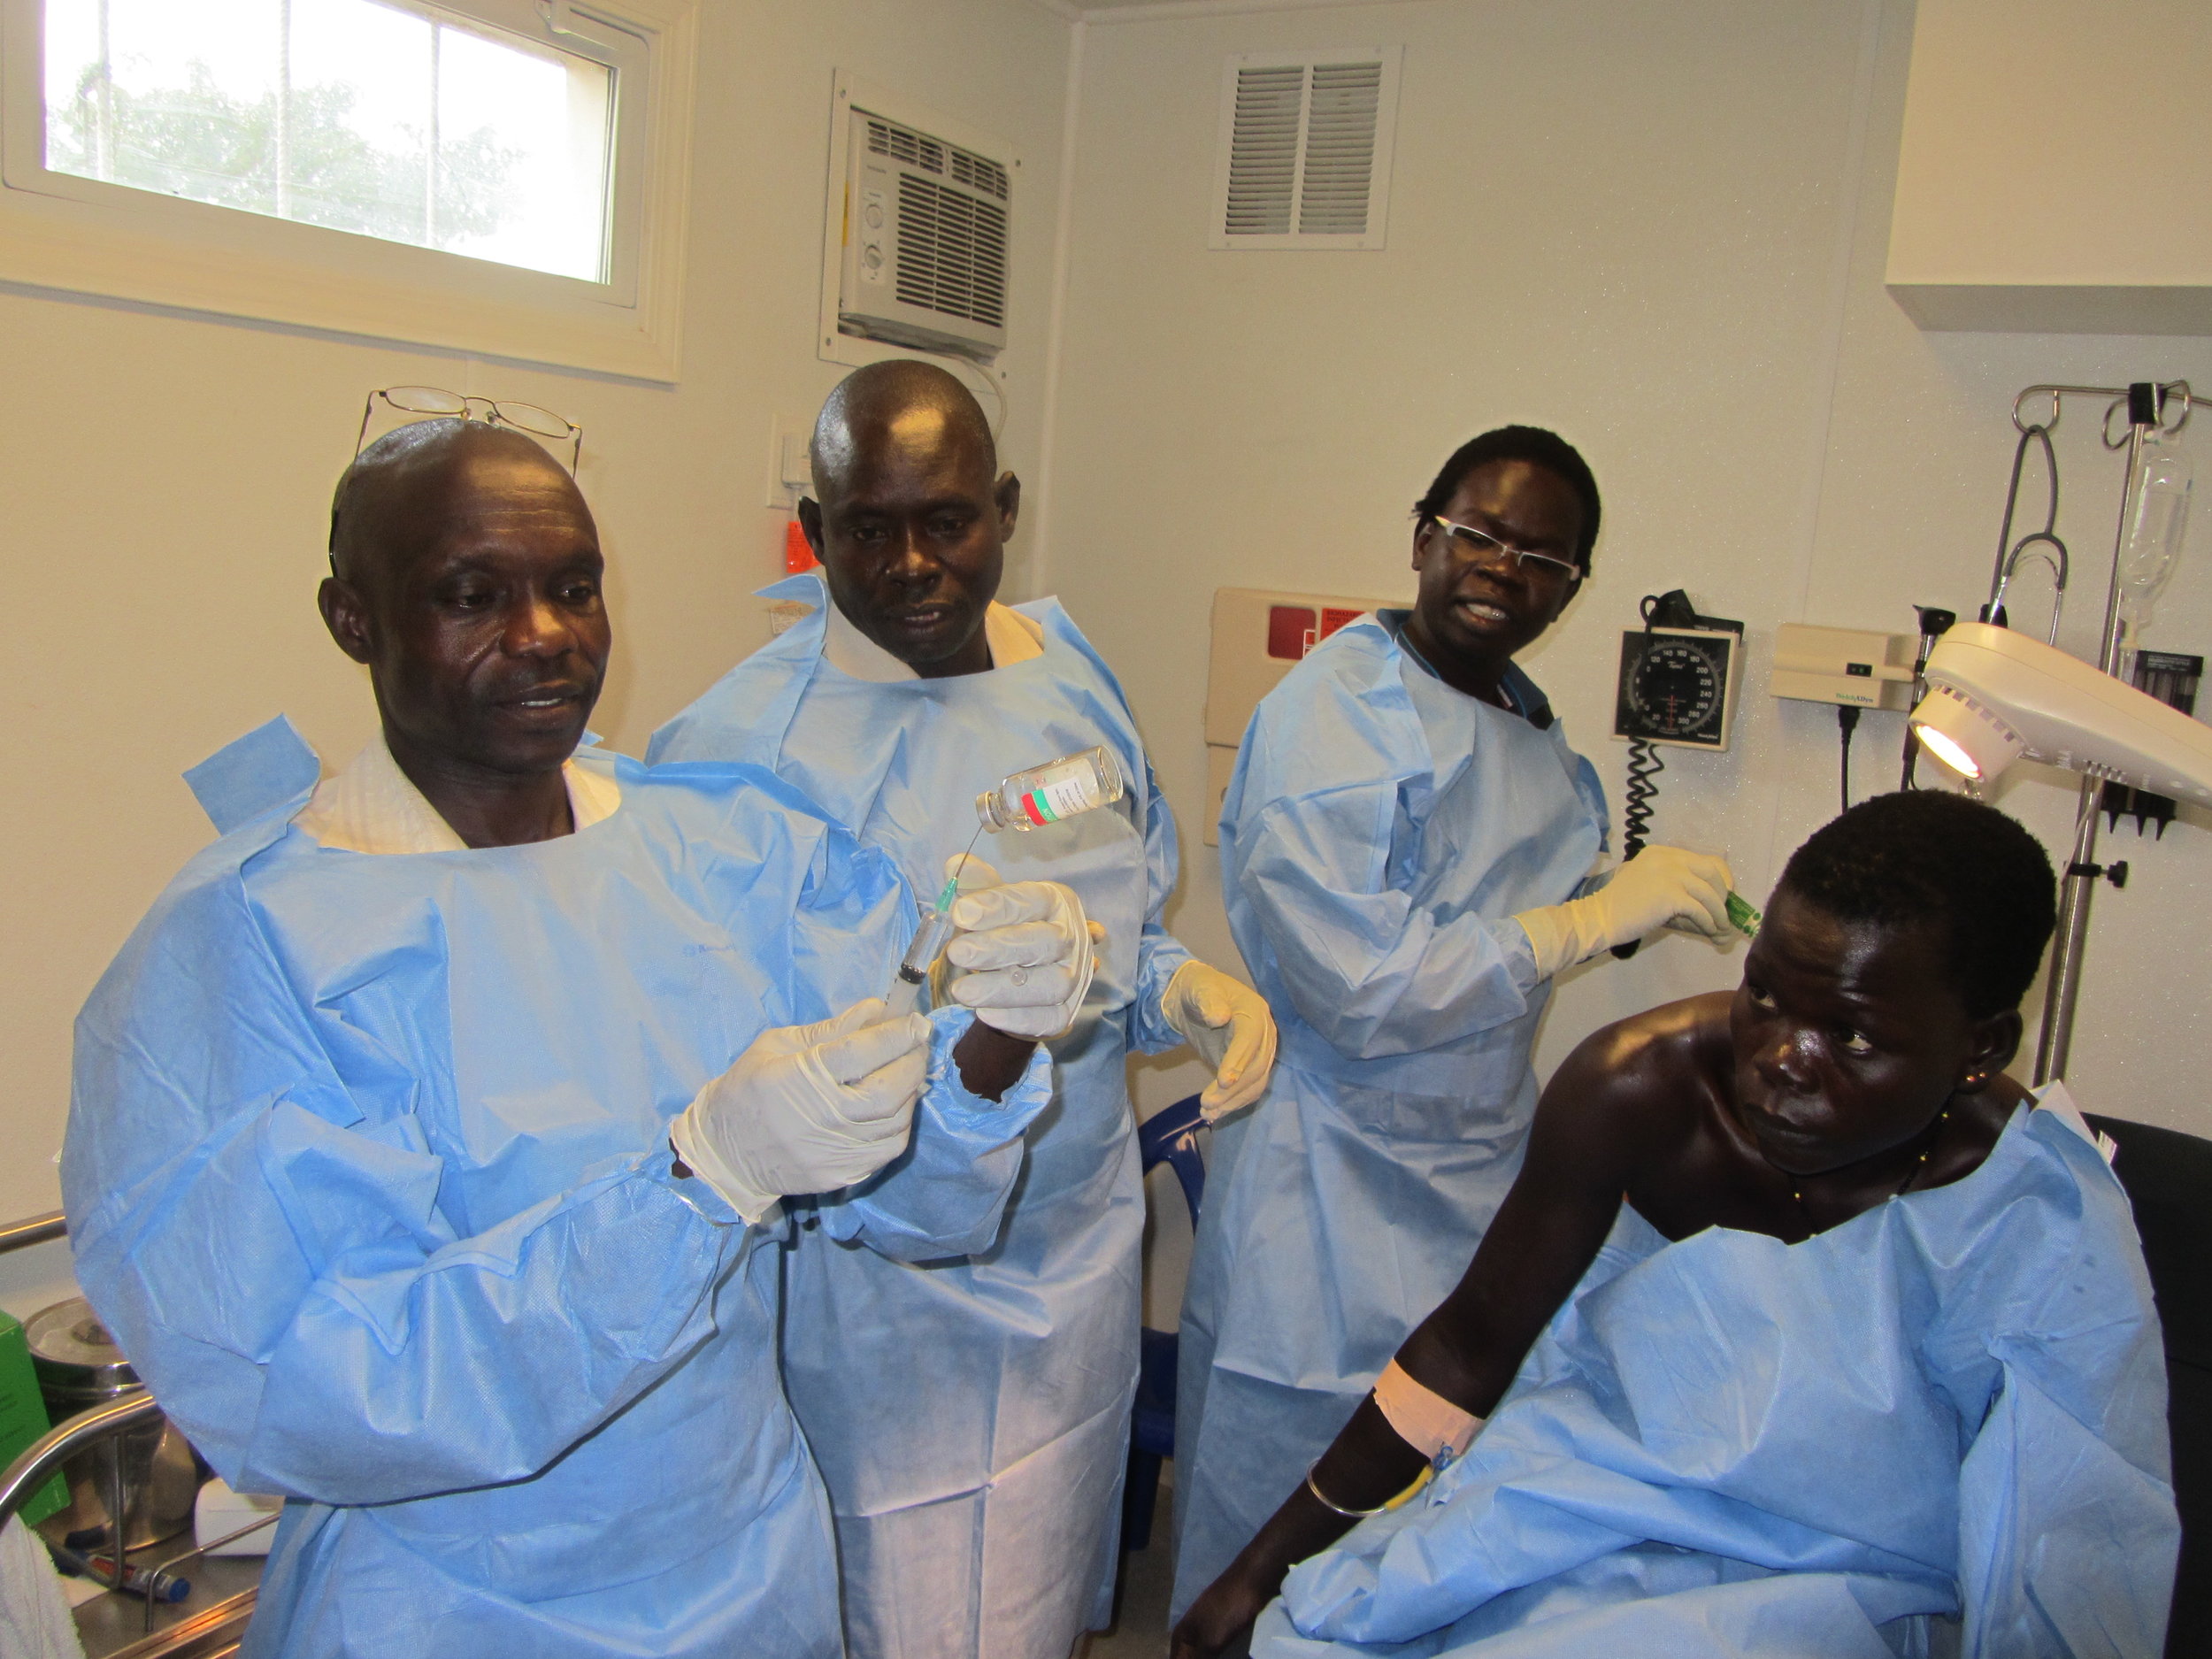   The Healing Kadi Foundation   providing sustainable health care to the people of South Sudan   Achievements  